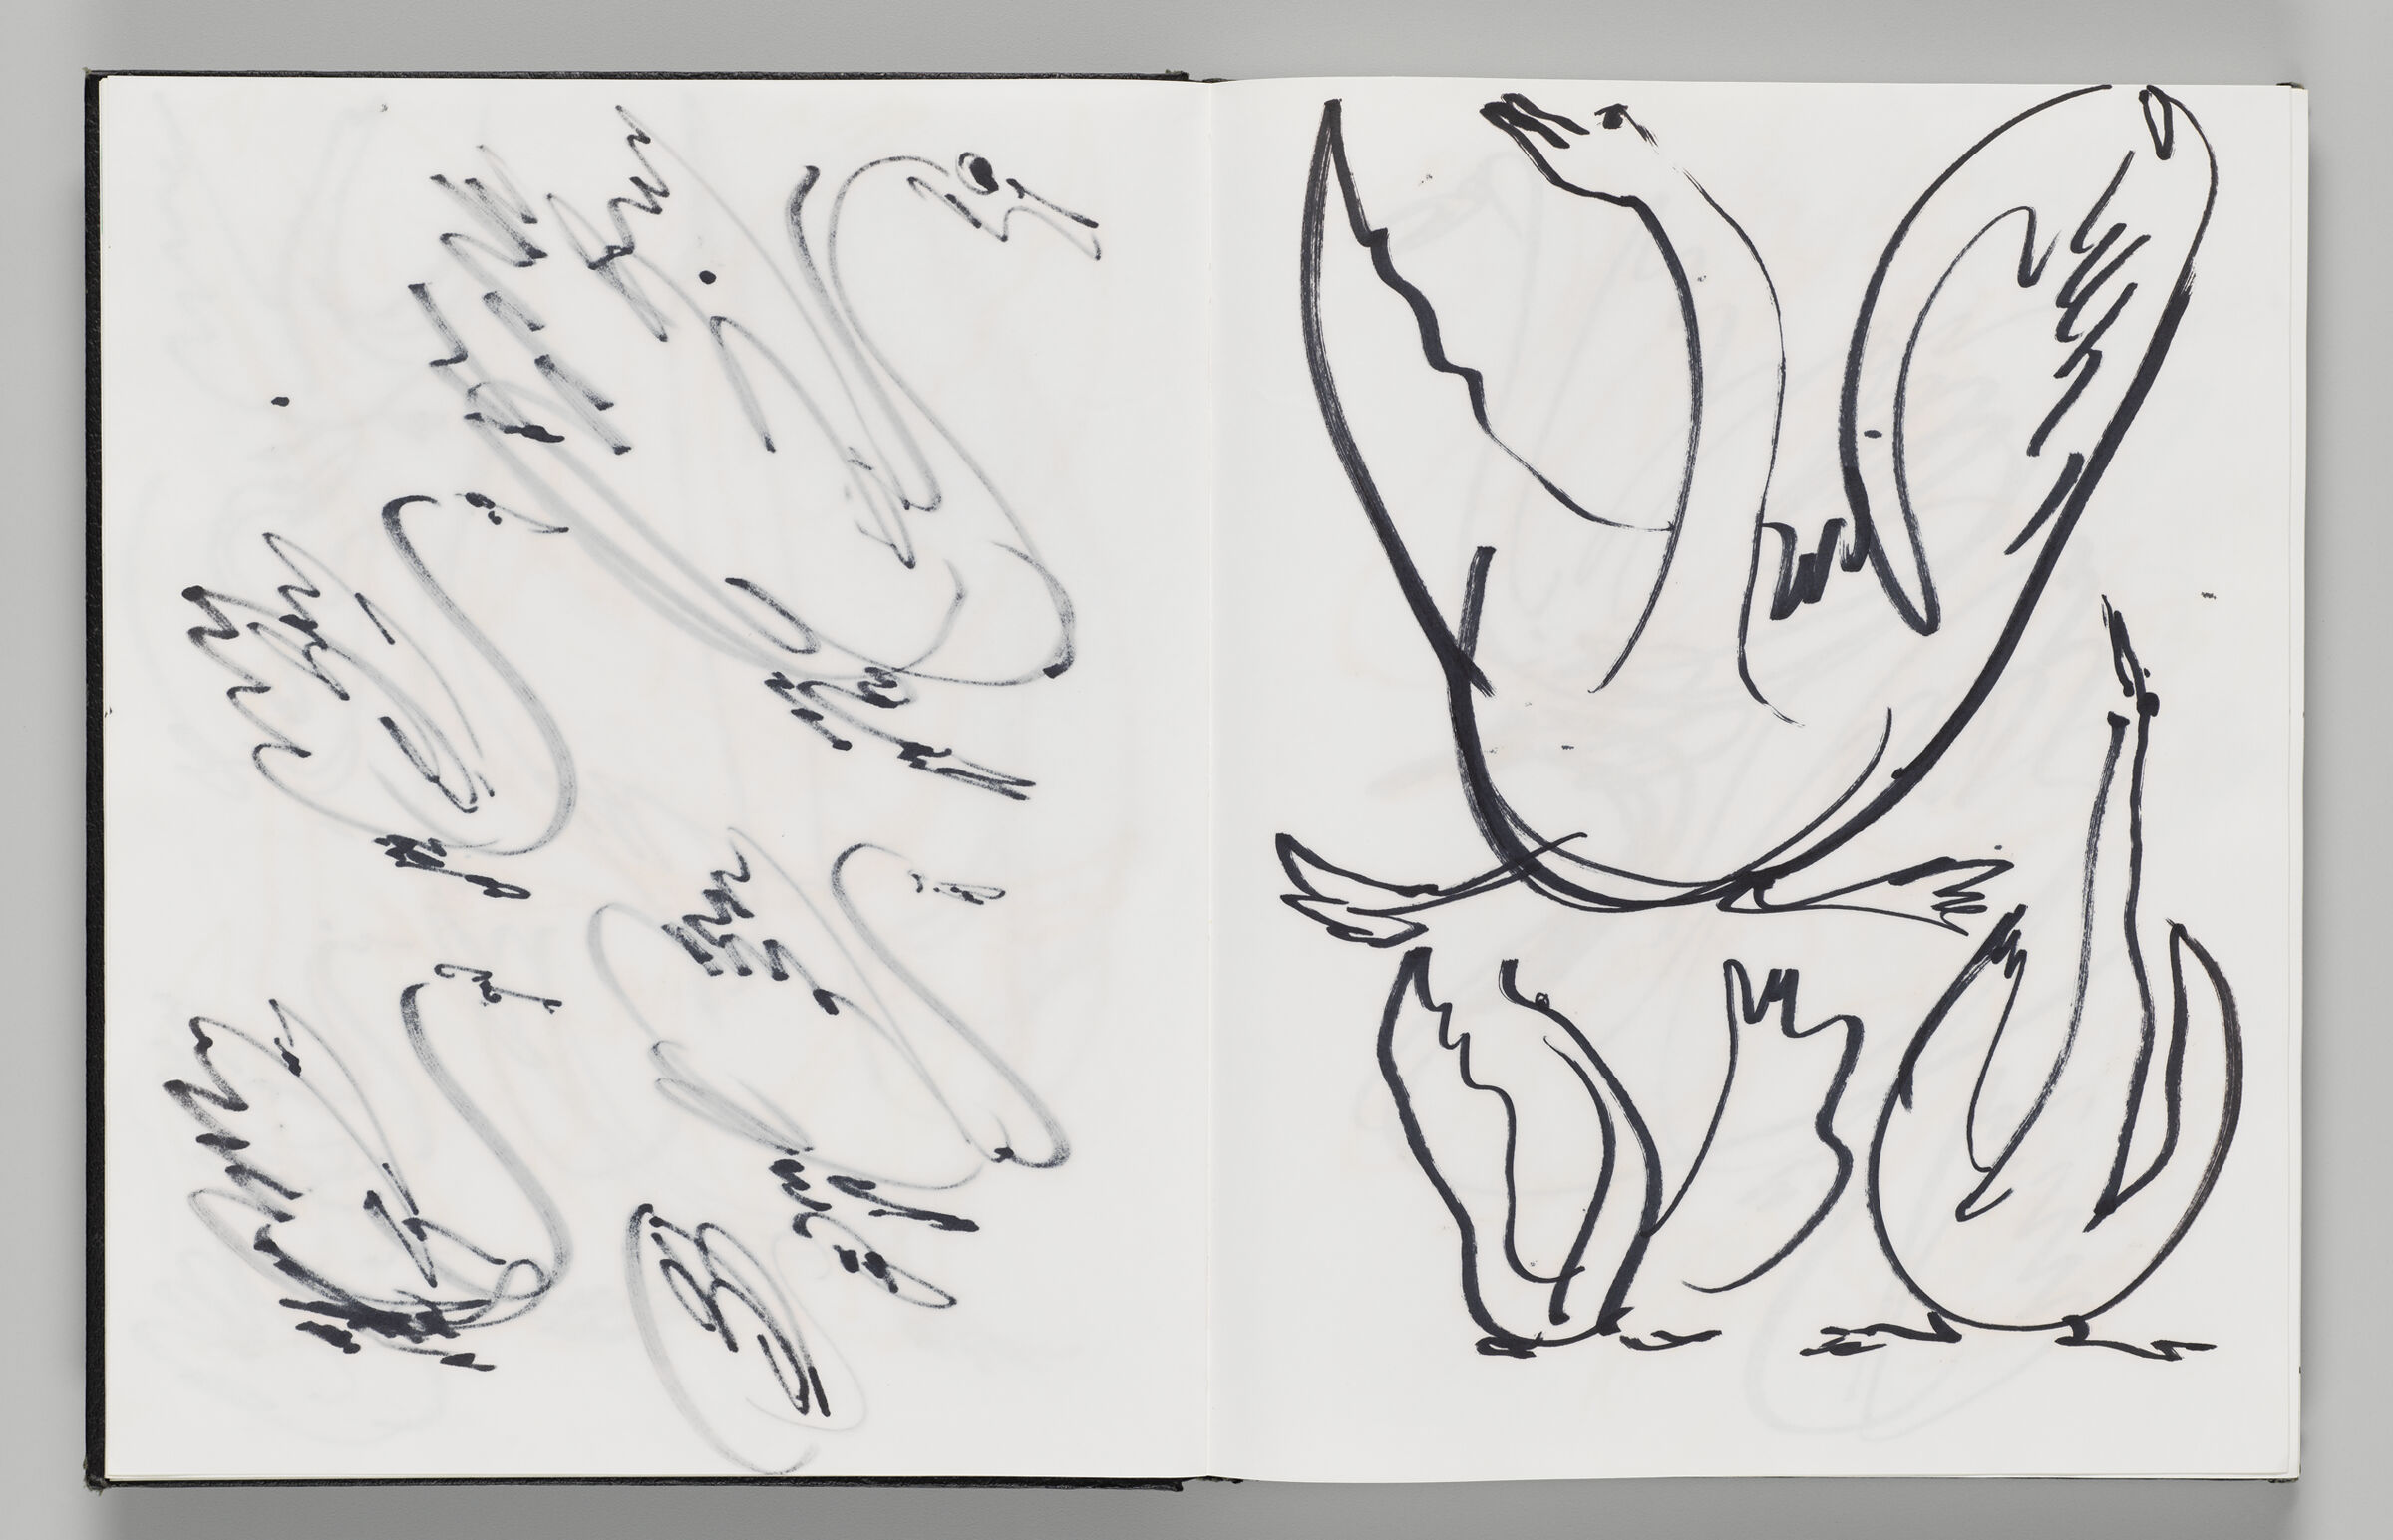 Untitled (Bleed-Through Of Previous Page, Left Page); Untitled (Black Swans, Right Page)